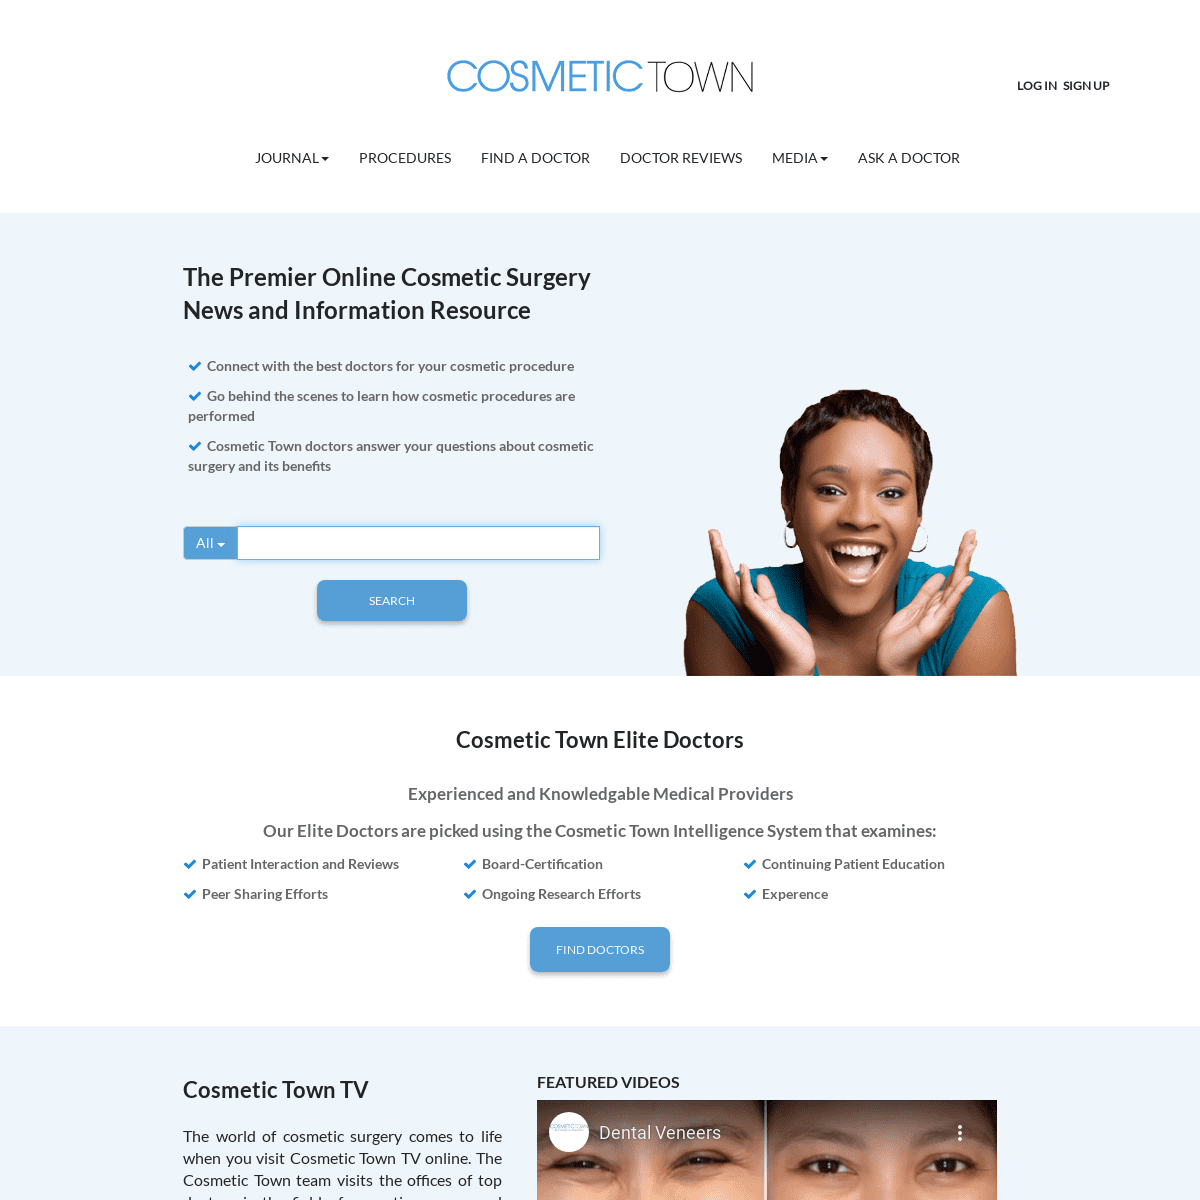 A complete backup of https://cosmetictown.com